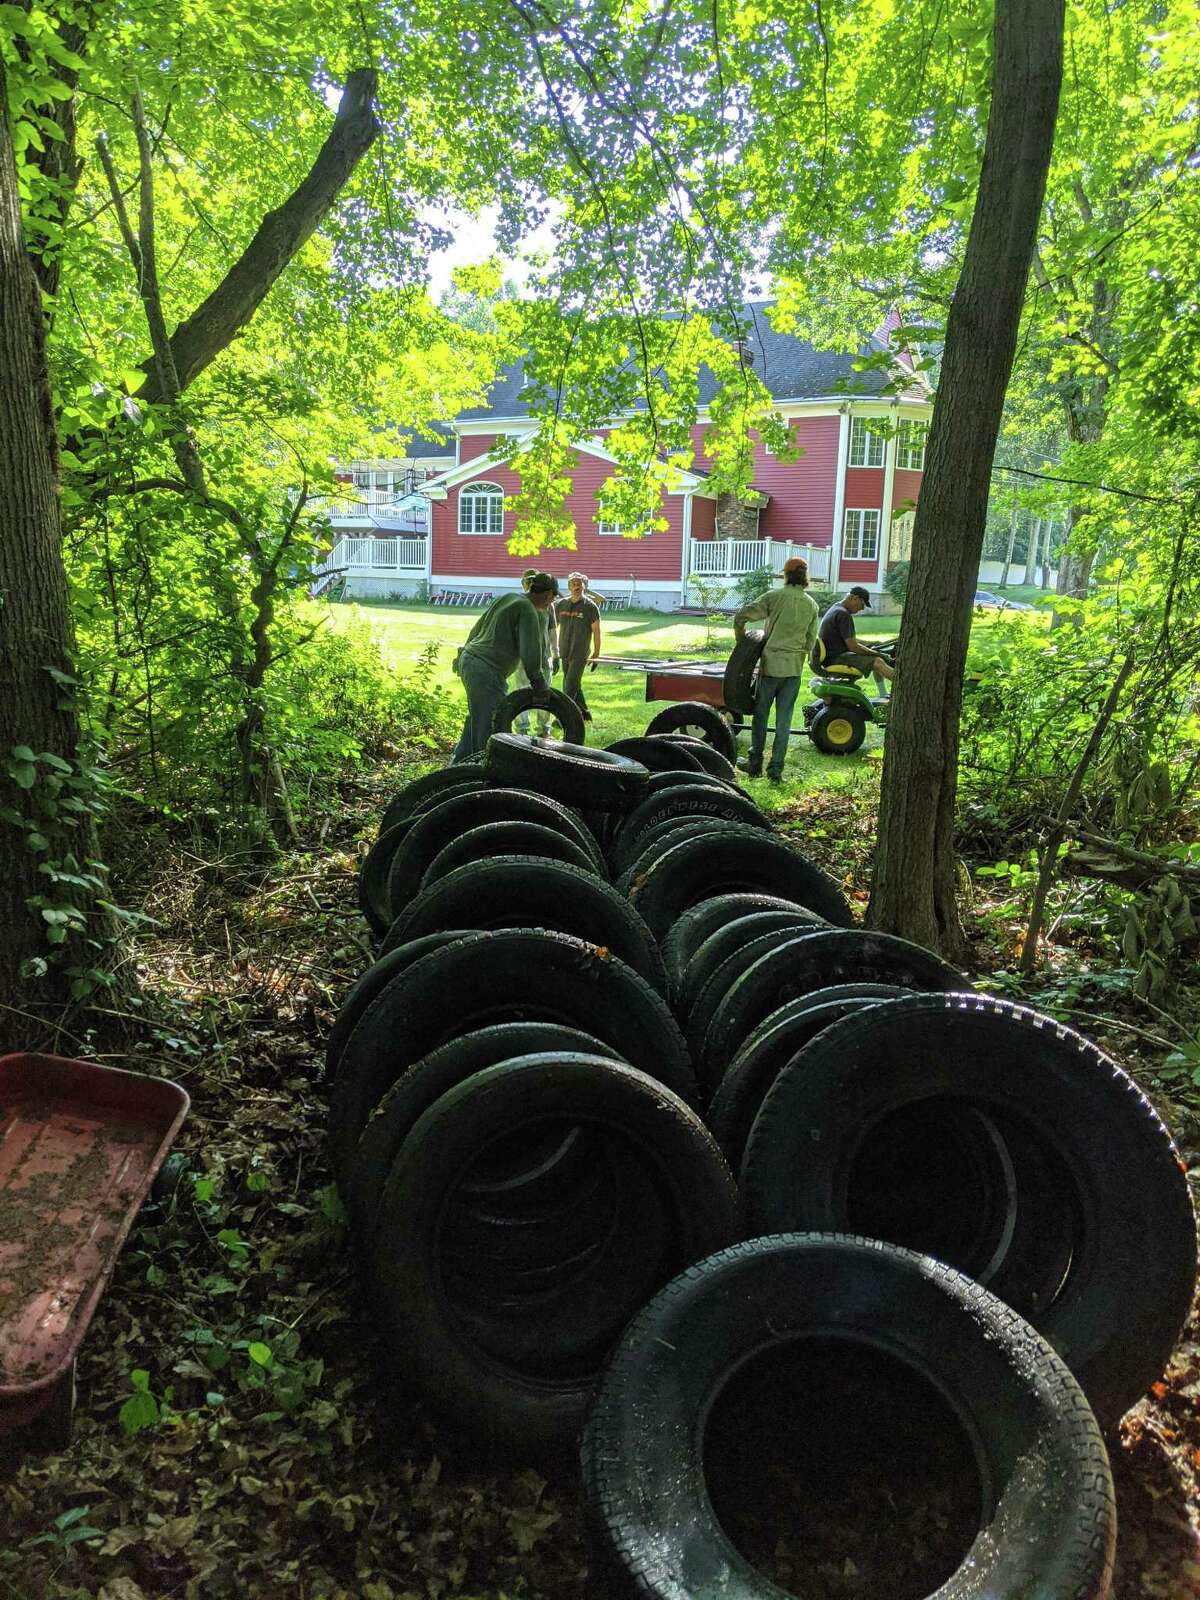 More than 20 volunteers dragged 188 old tires from the wooded area beside Little Pond Trail.